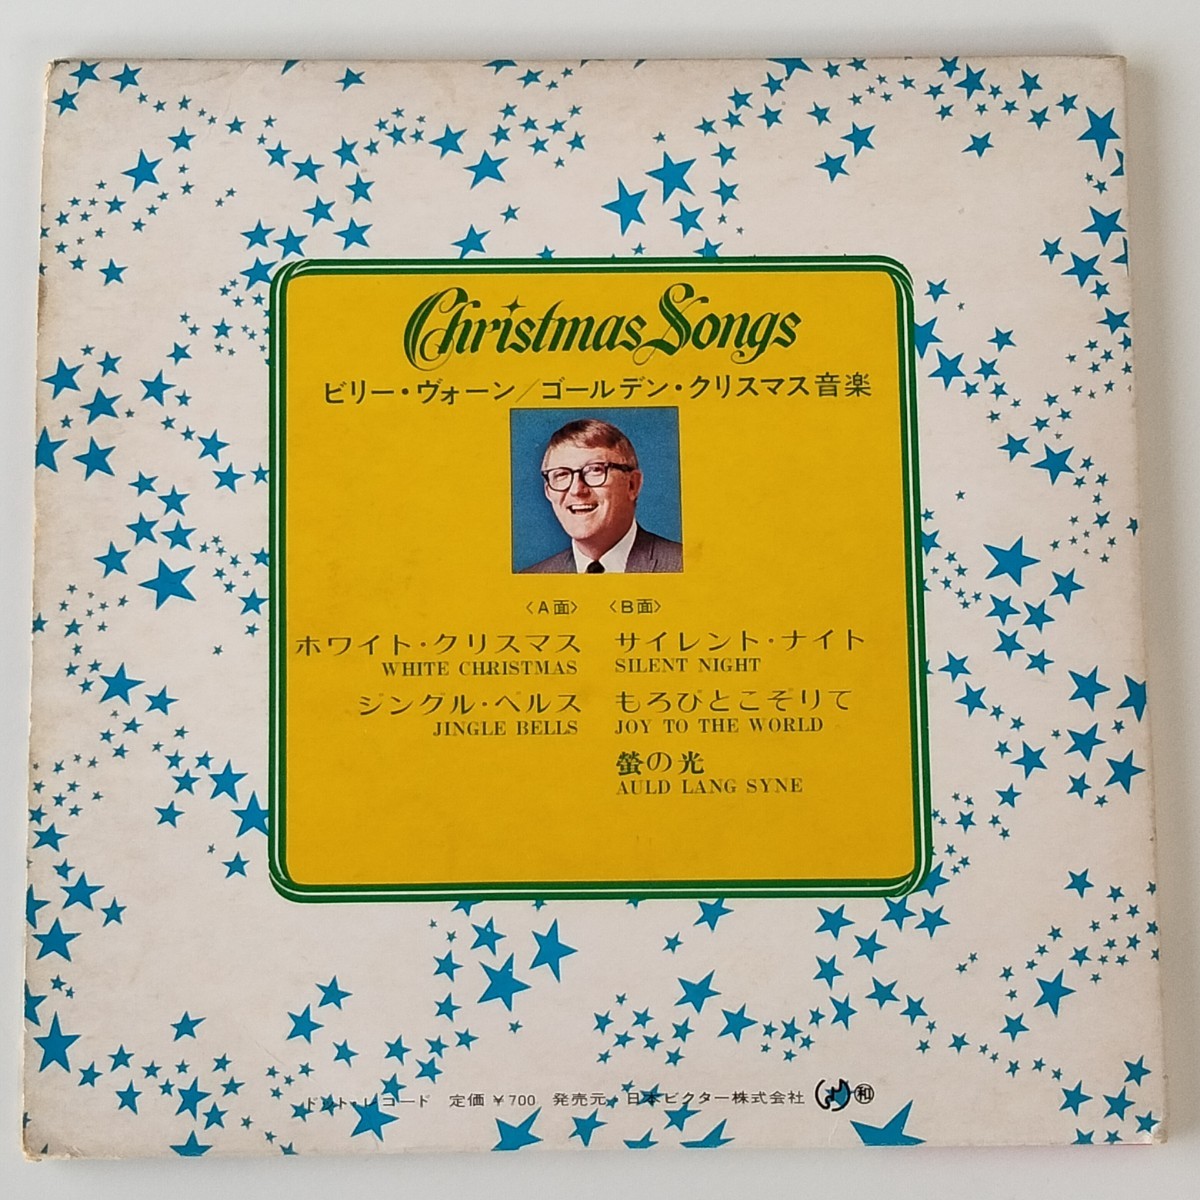 【7inch】BILLY VAUGHN/GOLDEN CHRISTMAS(SWG-28)ビリー・ヴォーン/ゴールデン・クリスマス音楽WIITE CHRISTMAS,JINGLE BELLS,SILENT NIGHT_画像2